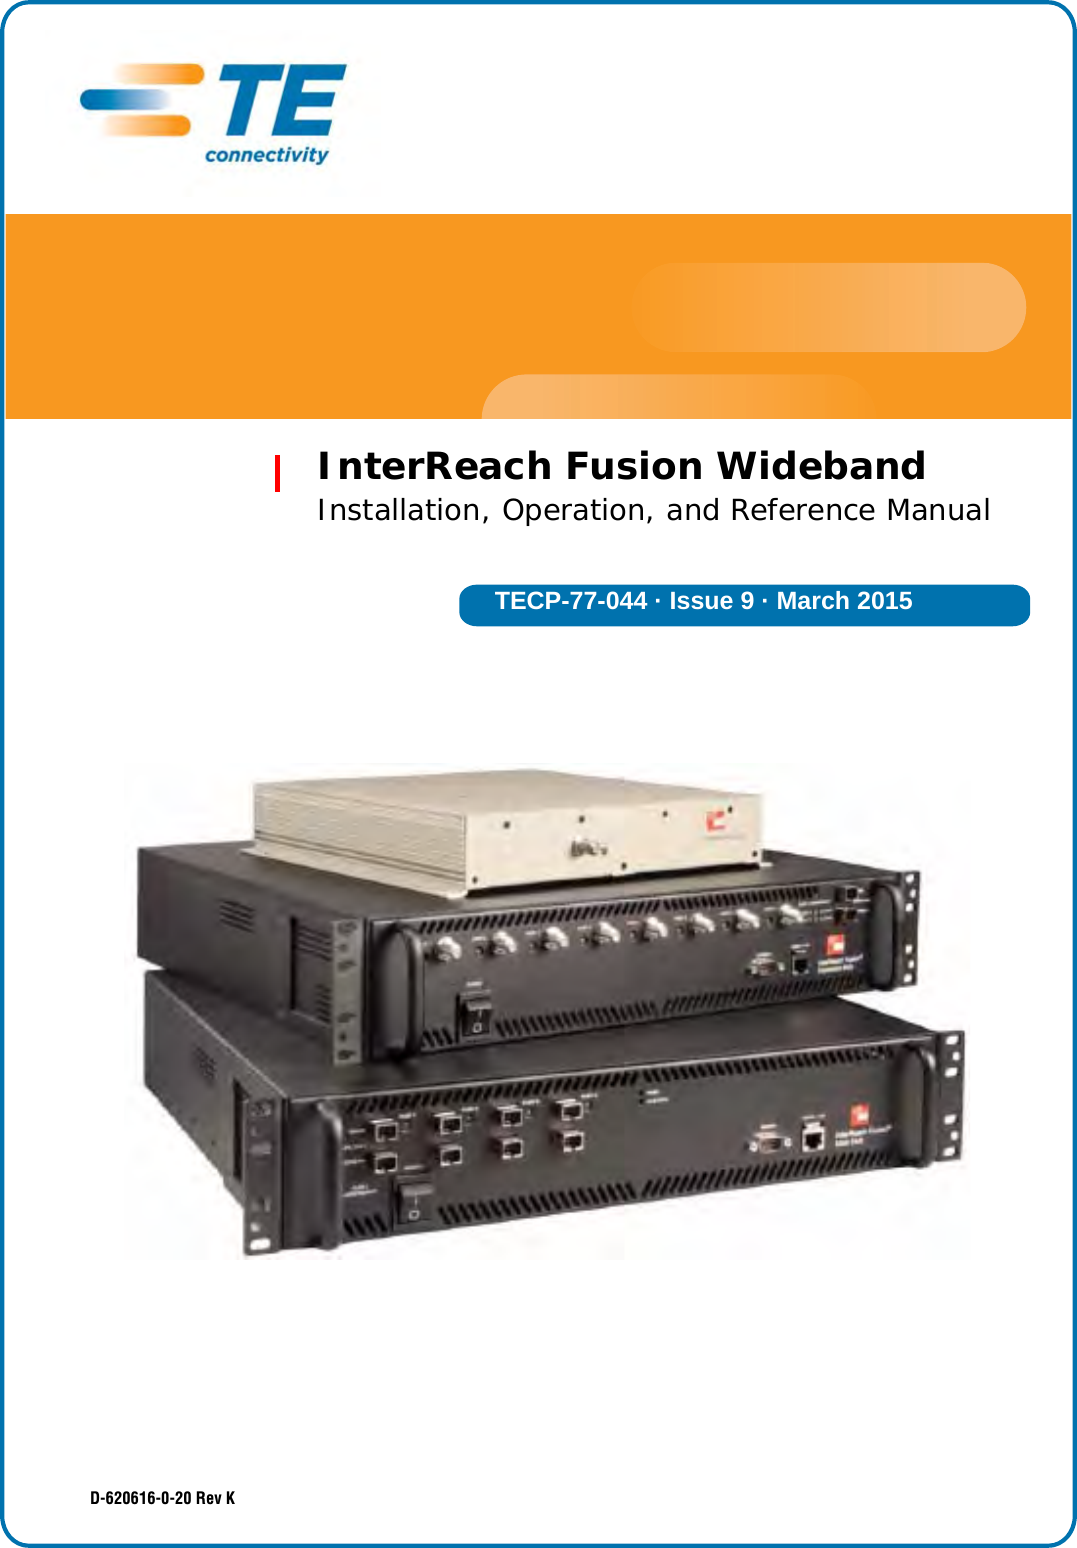 TECP-77-044 · Issue 9 · March 2015D-620616-0-20 Rev KInterReach Fusion WidebandInstallation, Operation, and Reference Manual